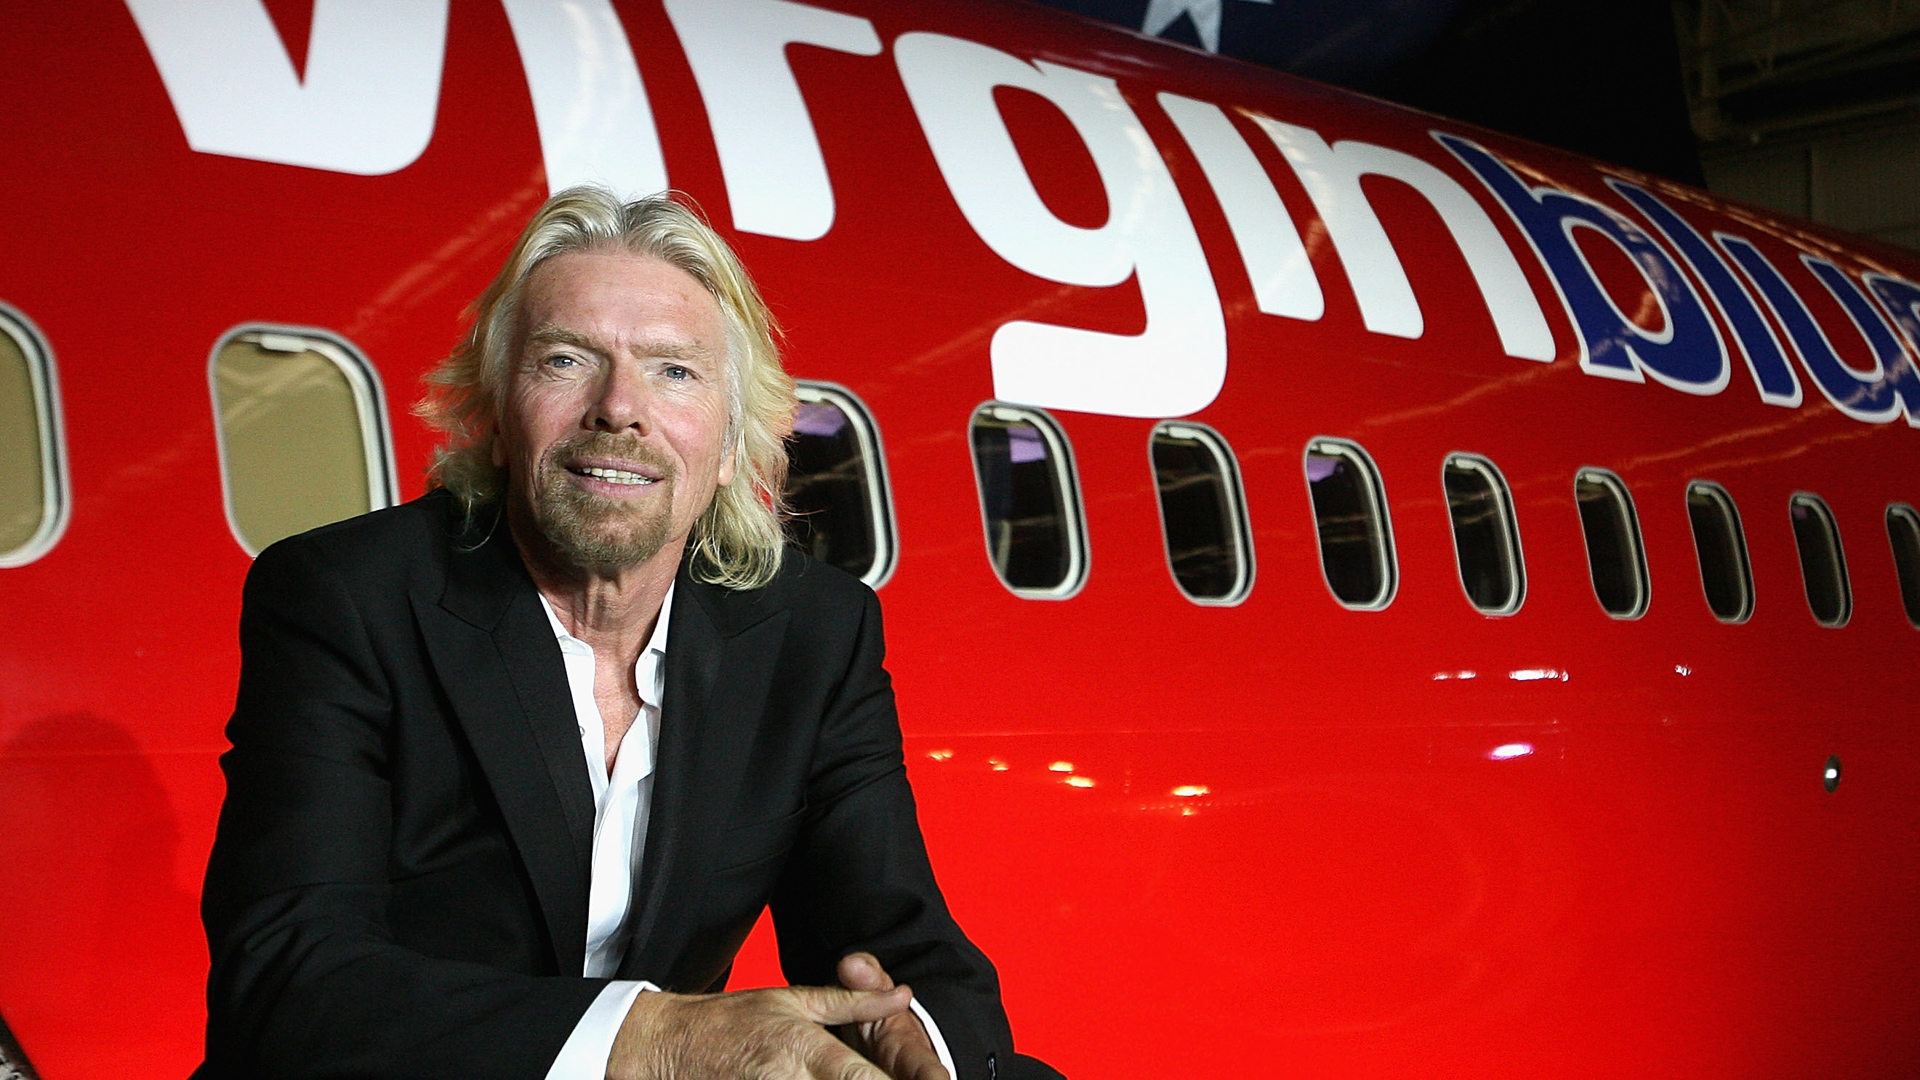 What is Richard Branson's net worth, how old is he, when did he